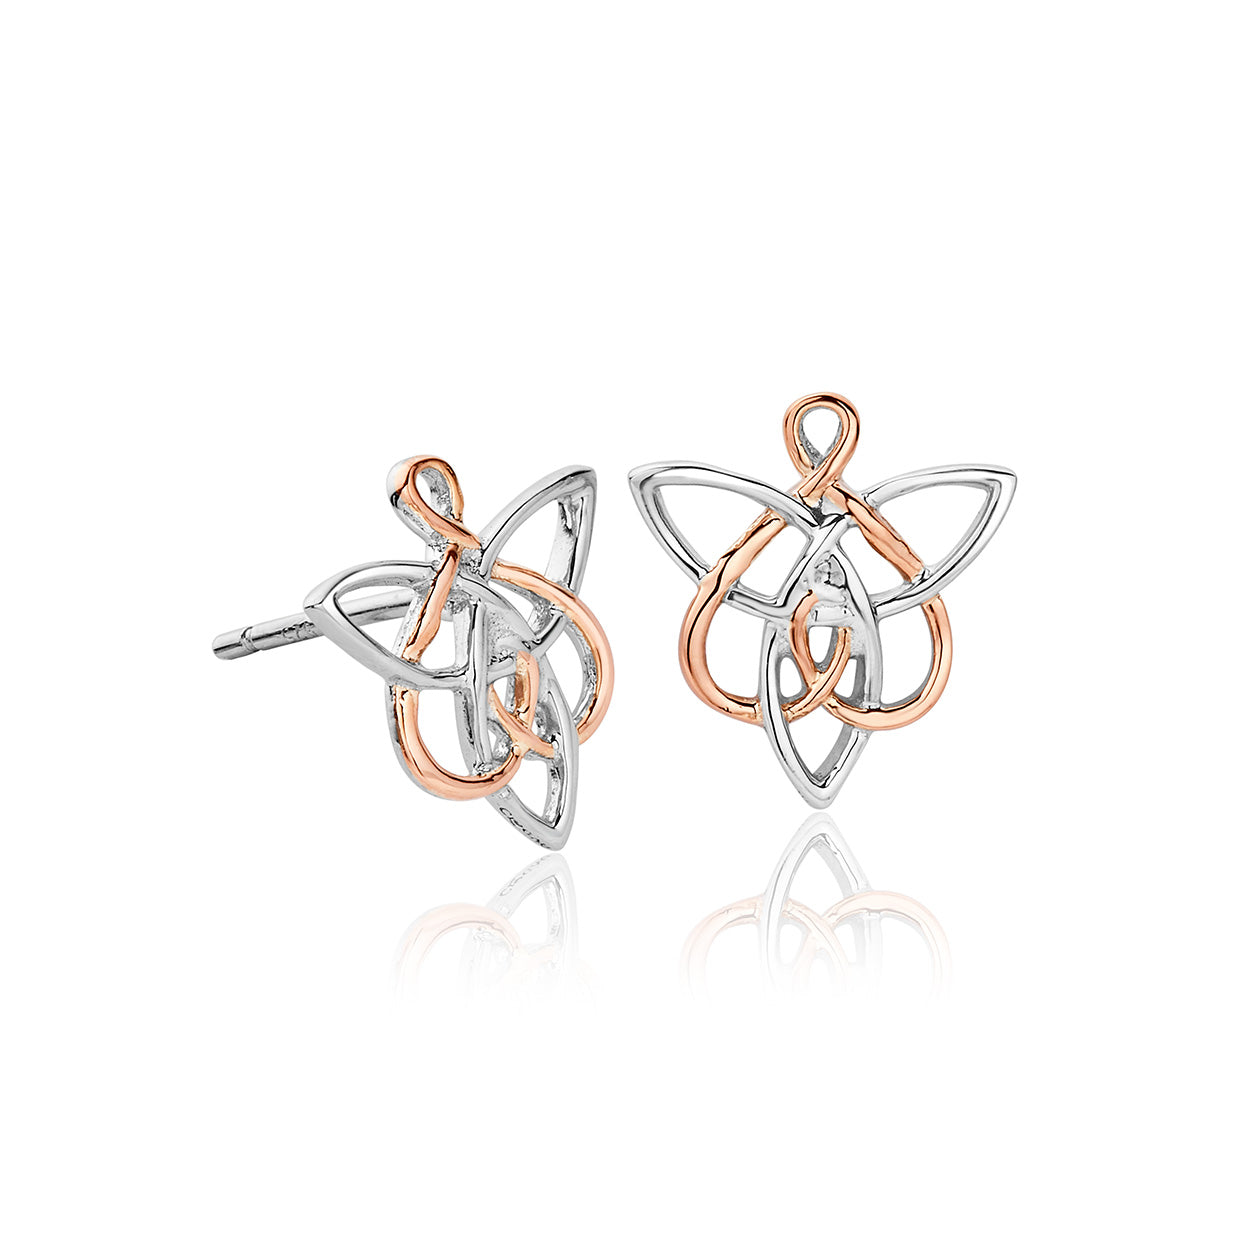 Clogau Fairies of the Mine White Topaz Sterling Silver Stud Earrings